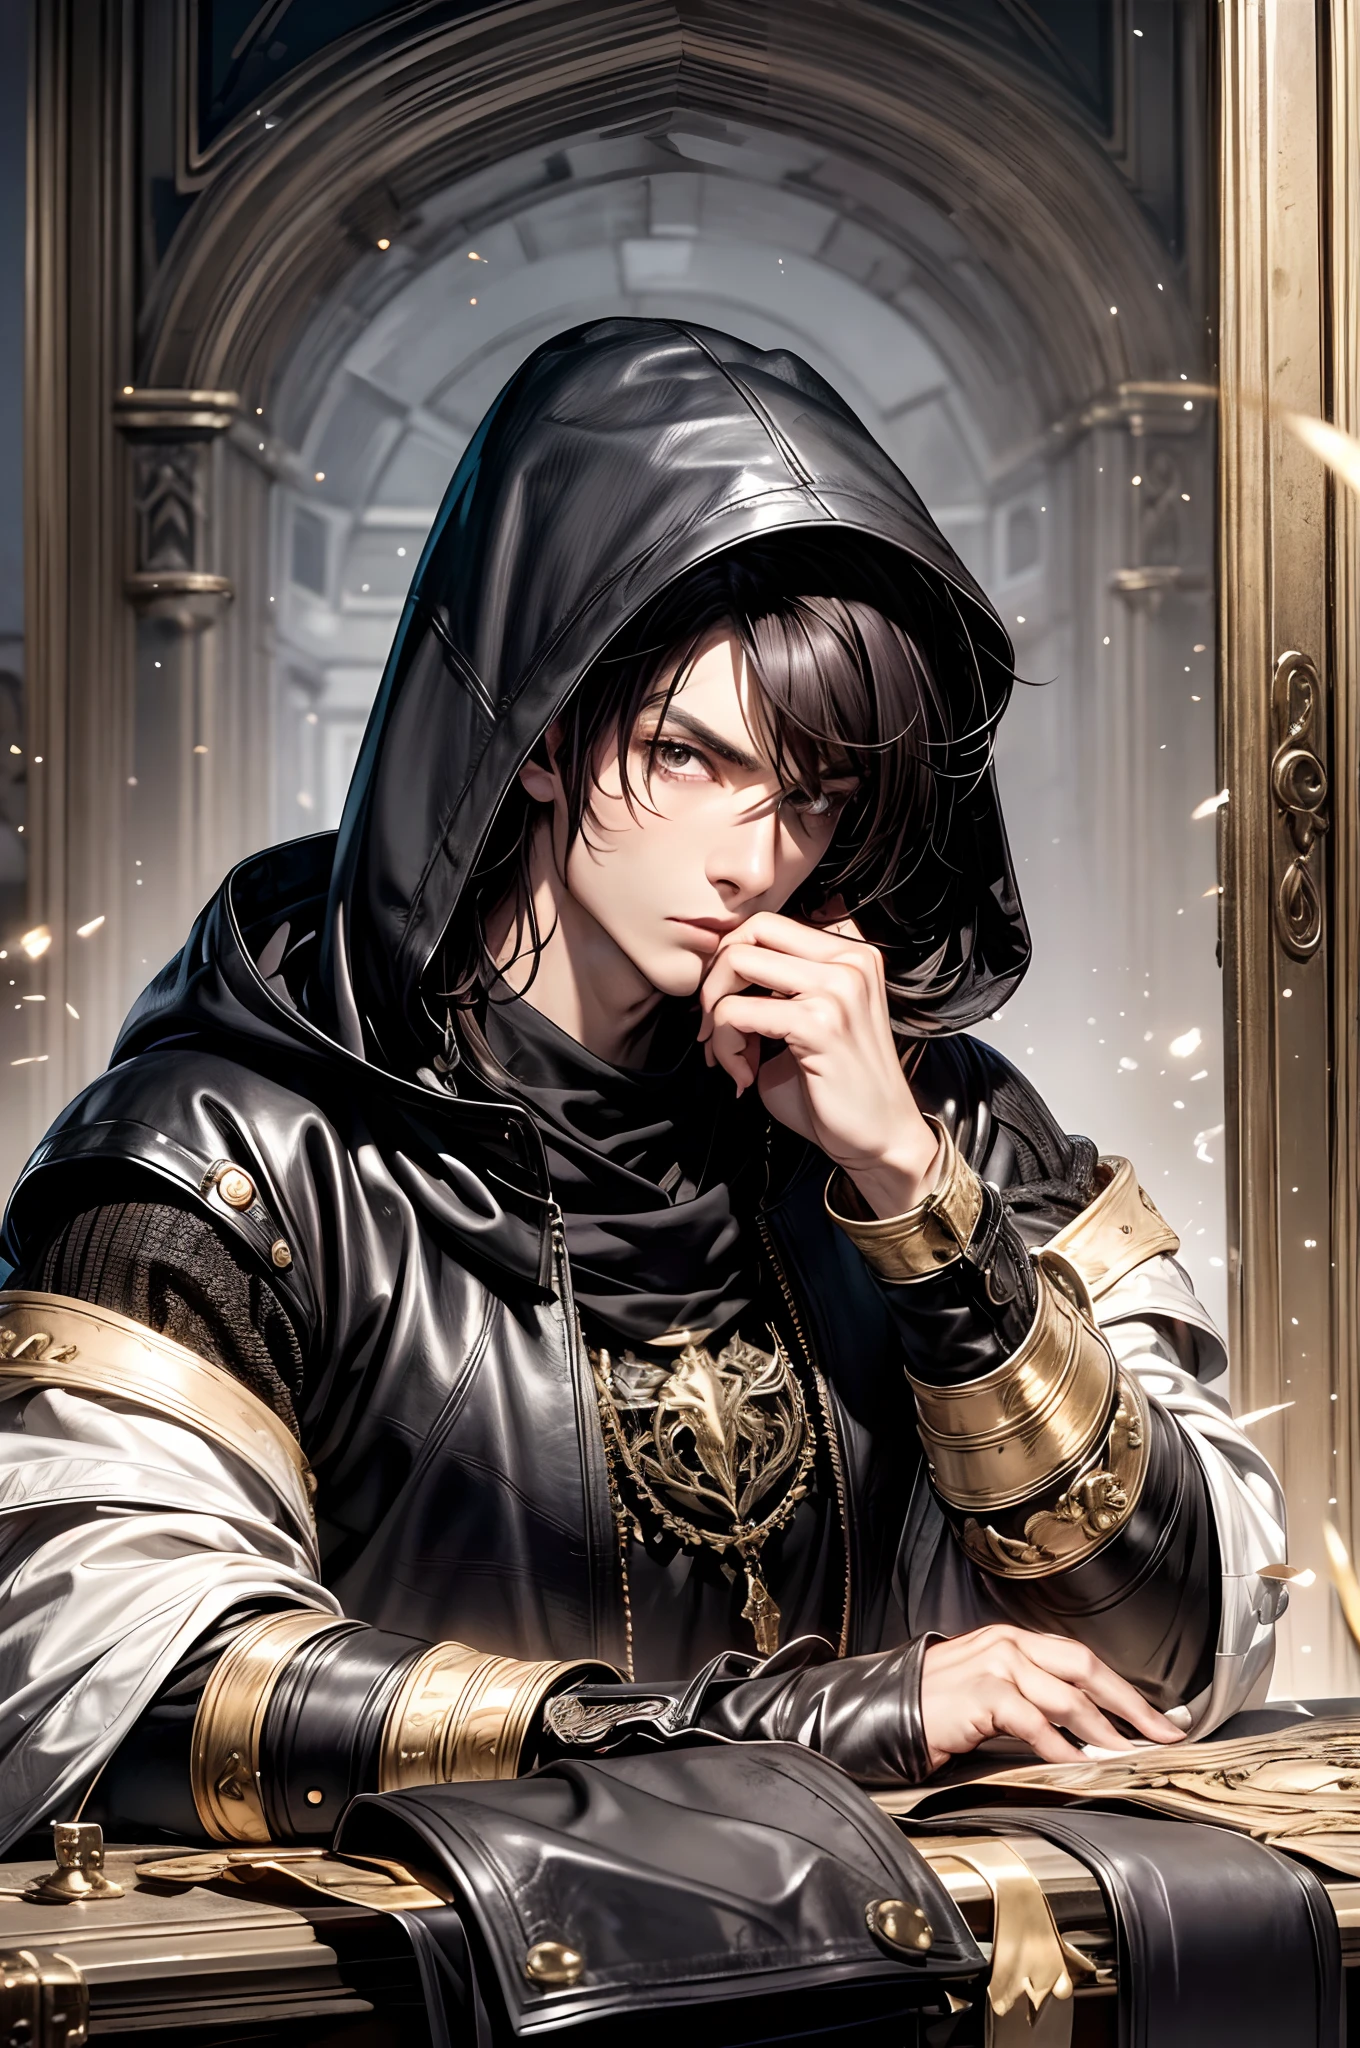 (absurderes, hight resolution, ultra-detailliert), 1 male, Adult, Handsome, High muscular face, broad shoulders, finely detailed eyes, Short black hair, Brown eyes, Black cloak, Wearing a hood, Leather Vest, Leather bag at waist., 2 daggers on the belt, castle, Medieval atmosphere, Natural Light and Shadow, Bright particles fly around a person, Fantastic, Mysterious, Bright glow,  Seated Pose, Serious expression, Cold, thoughtful, Mouth Shut